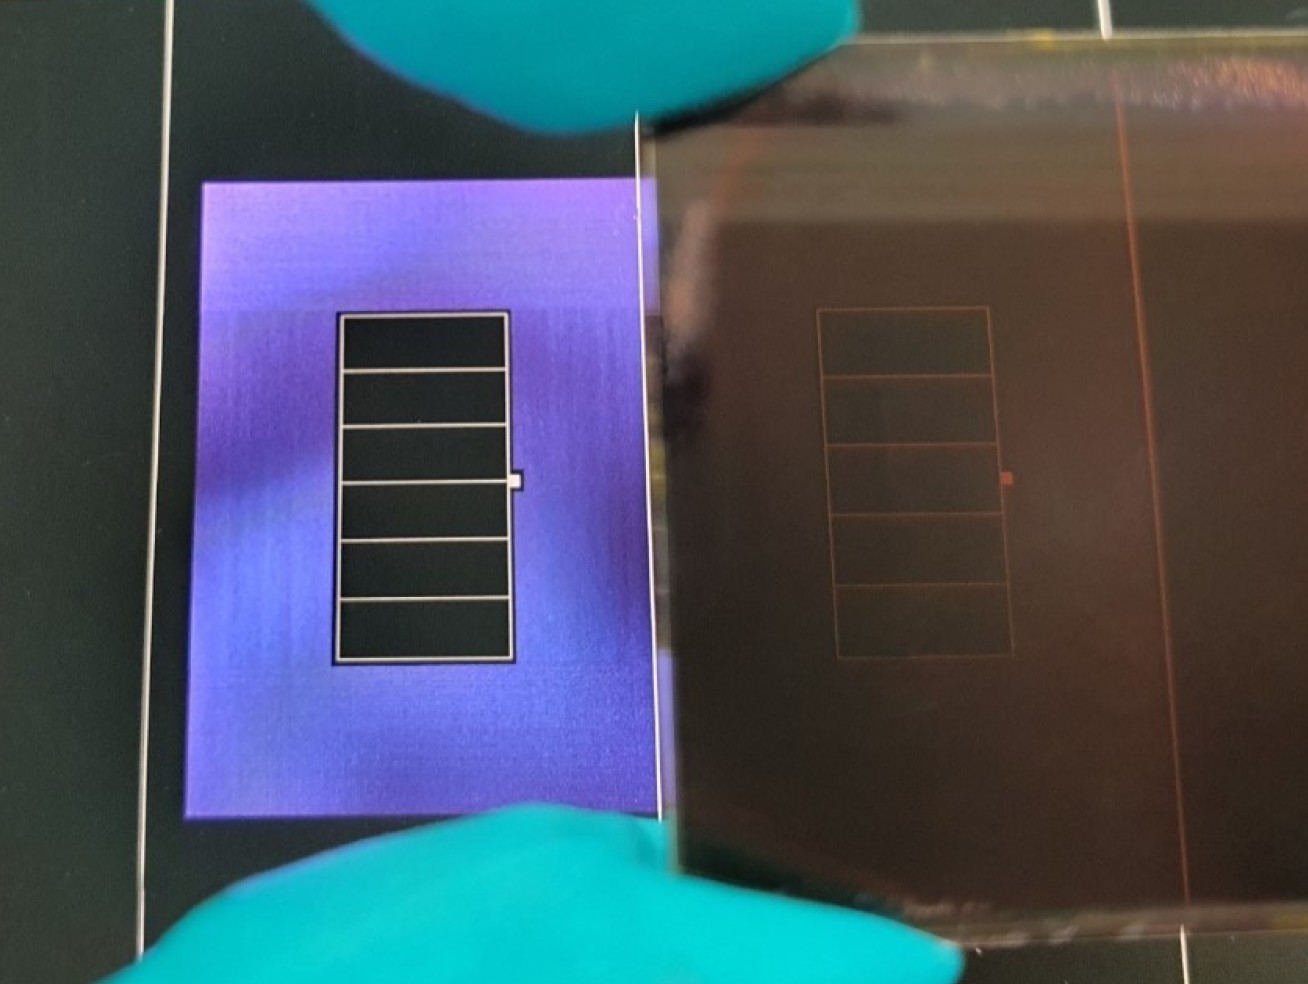 The technique we demonstrate allows perovskite absorbers to be integrated into more unusual device structures that can enable their use in a wider range of renewable energy applications